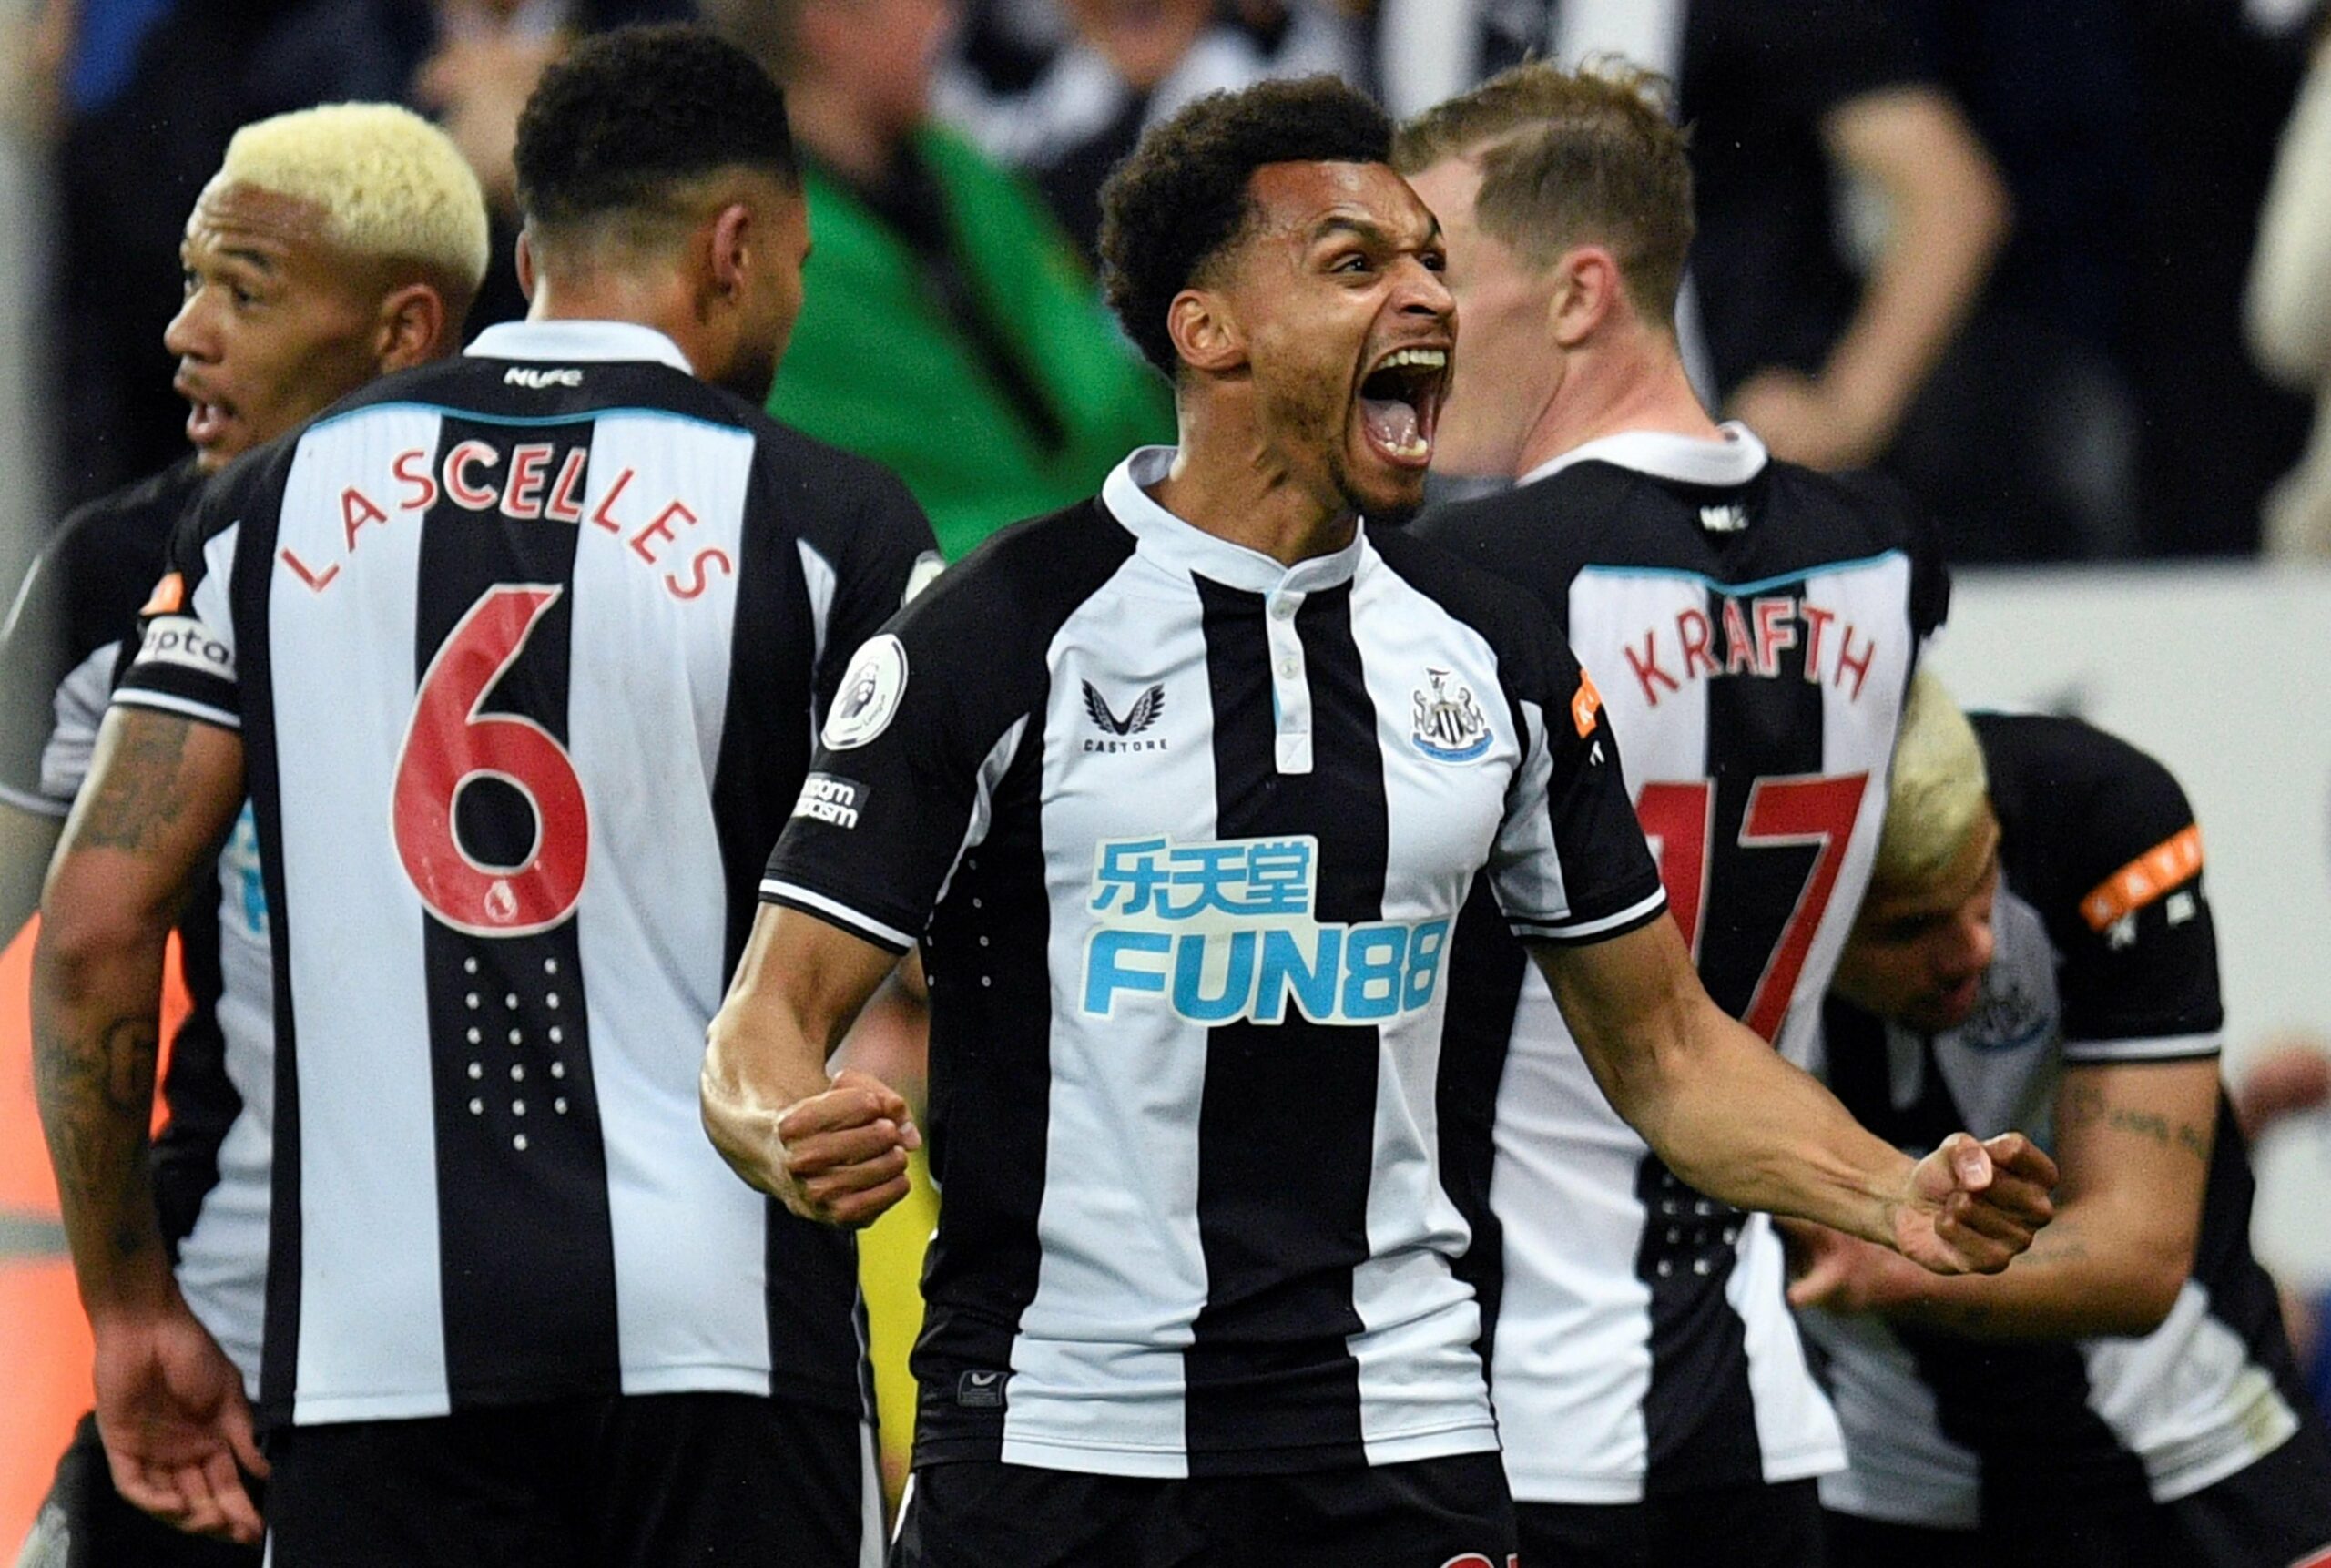 Newcastle United beat Arsenal 2-0 in the English Premier League